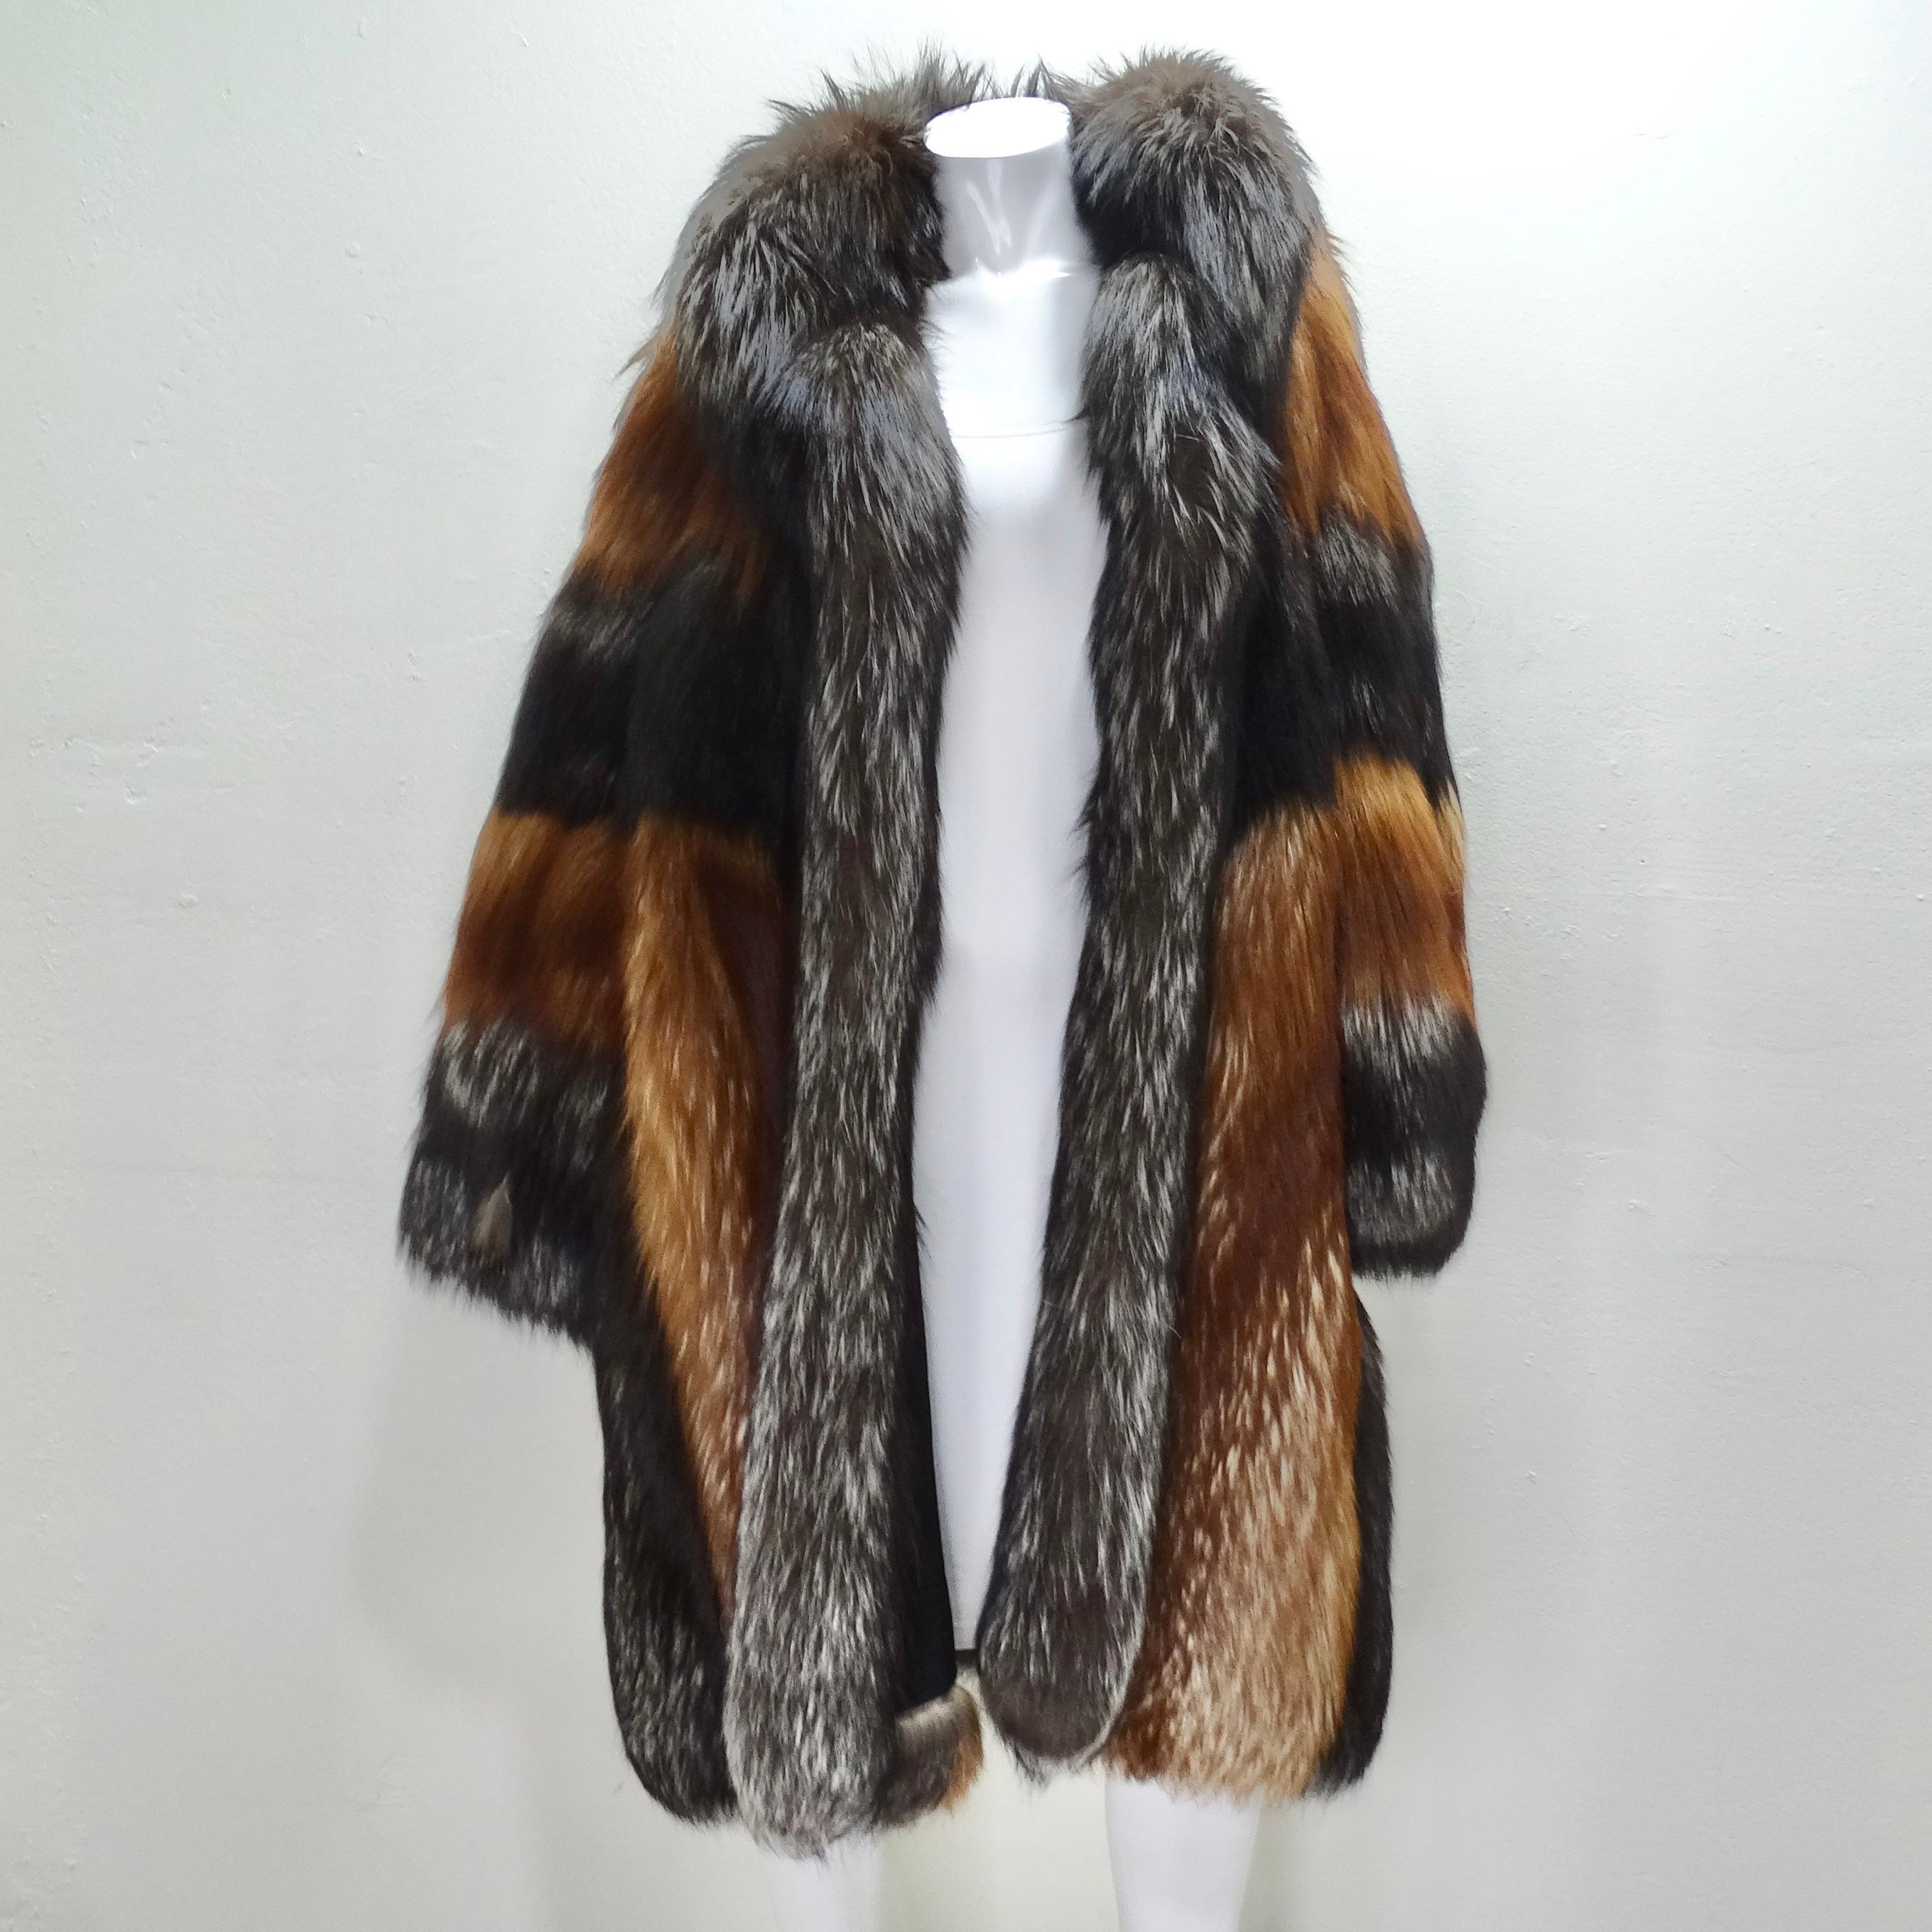 Get your hands on this breath taking 1970s Christian Dior fox fur coat! The most luxurious and dramatic classic fur coat in an eye catching contrasting brown fur. Beautiful stripes of varying shades of brown fox fur come together in a zig zag